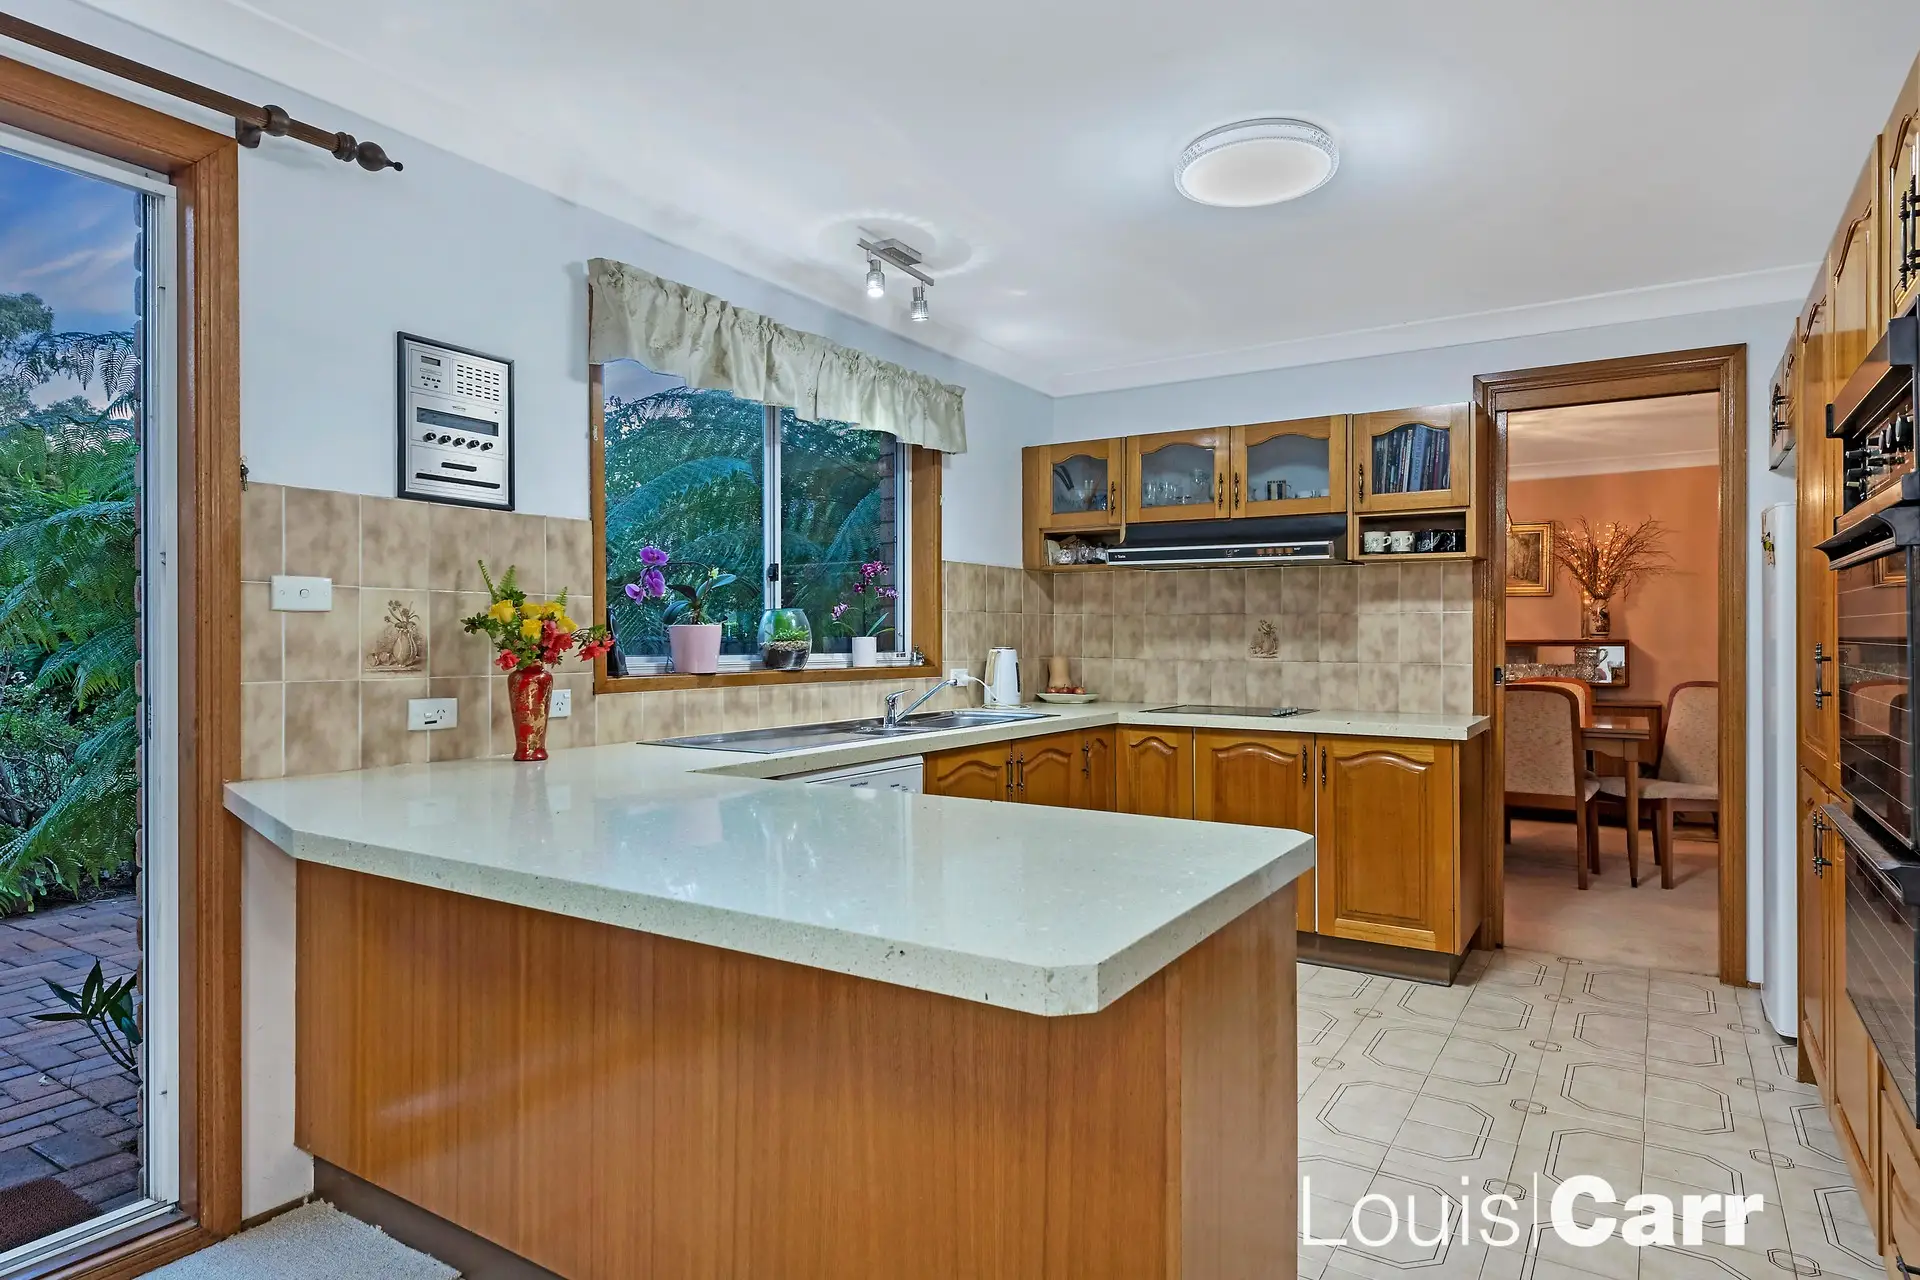 Photo #2: 59 Cedarwood Drive, Cherrybrook - Sold by Louis Carr Real Estate